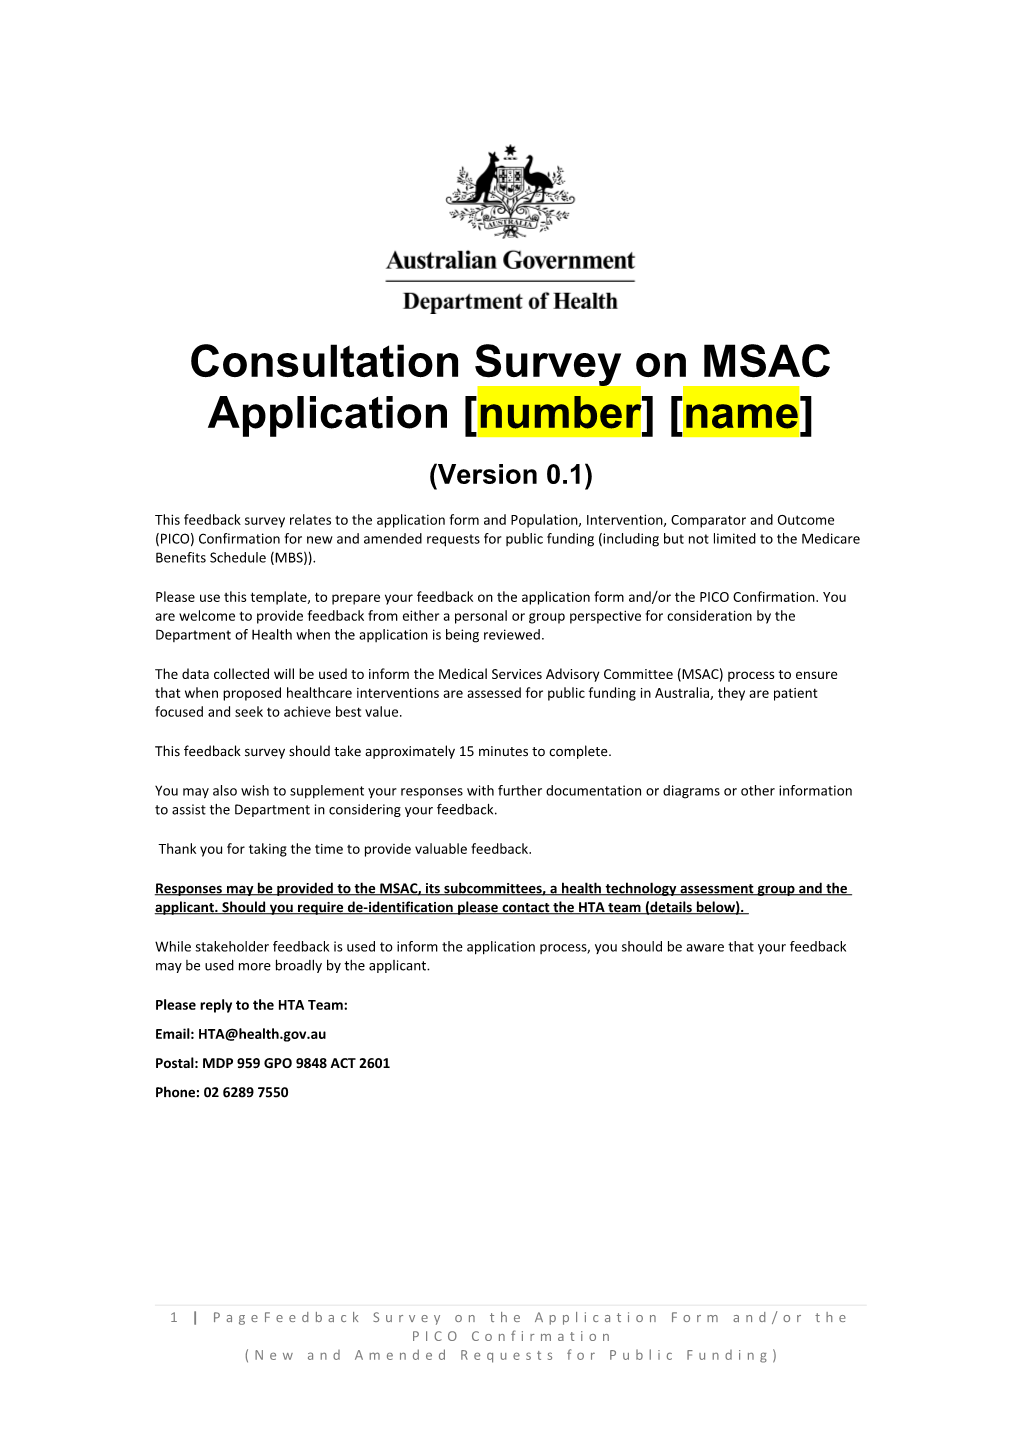 Consultation Survey on MSAC Application Number Name